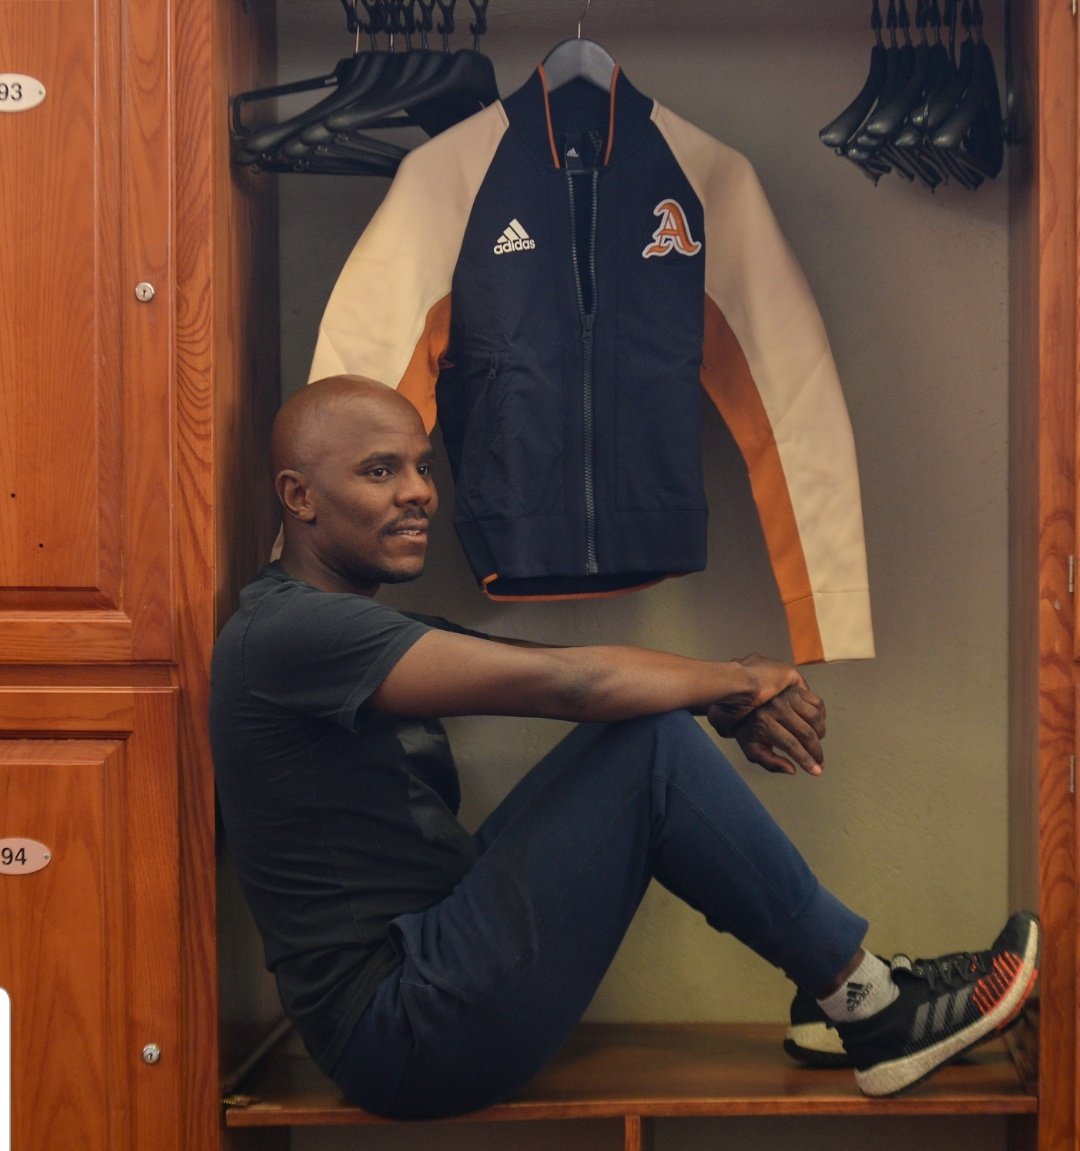 Thomas Mlambo on "In my VRCT Jacket #WeRepresent The Game, Everyday with all my heart ❤ @adidasZA https://t.co/jZSc6q8SdP" /